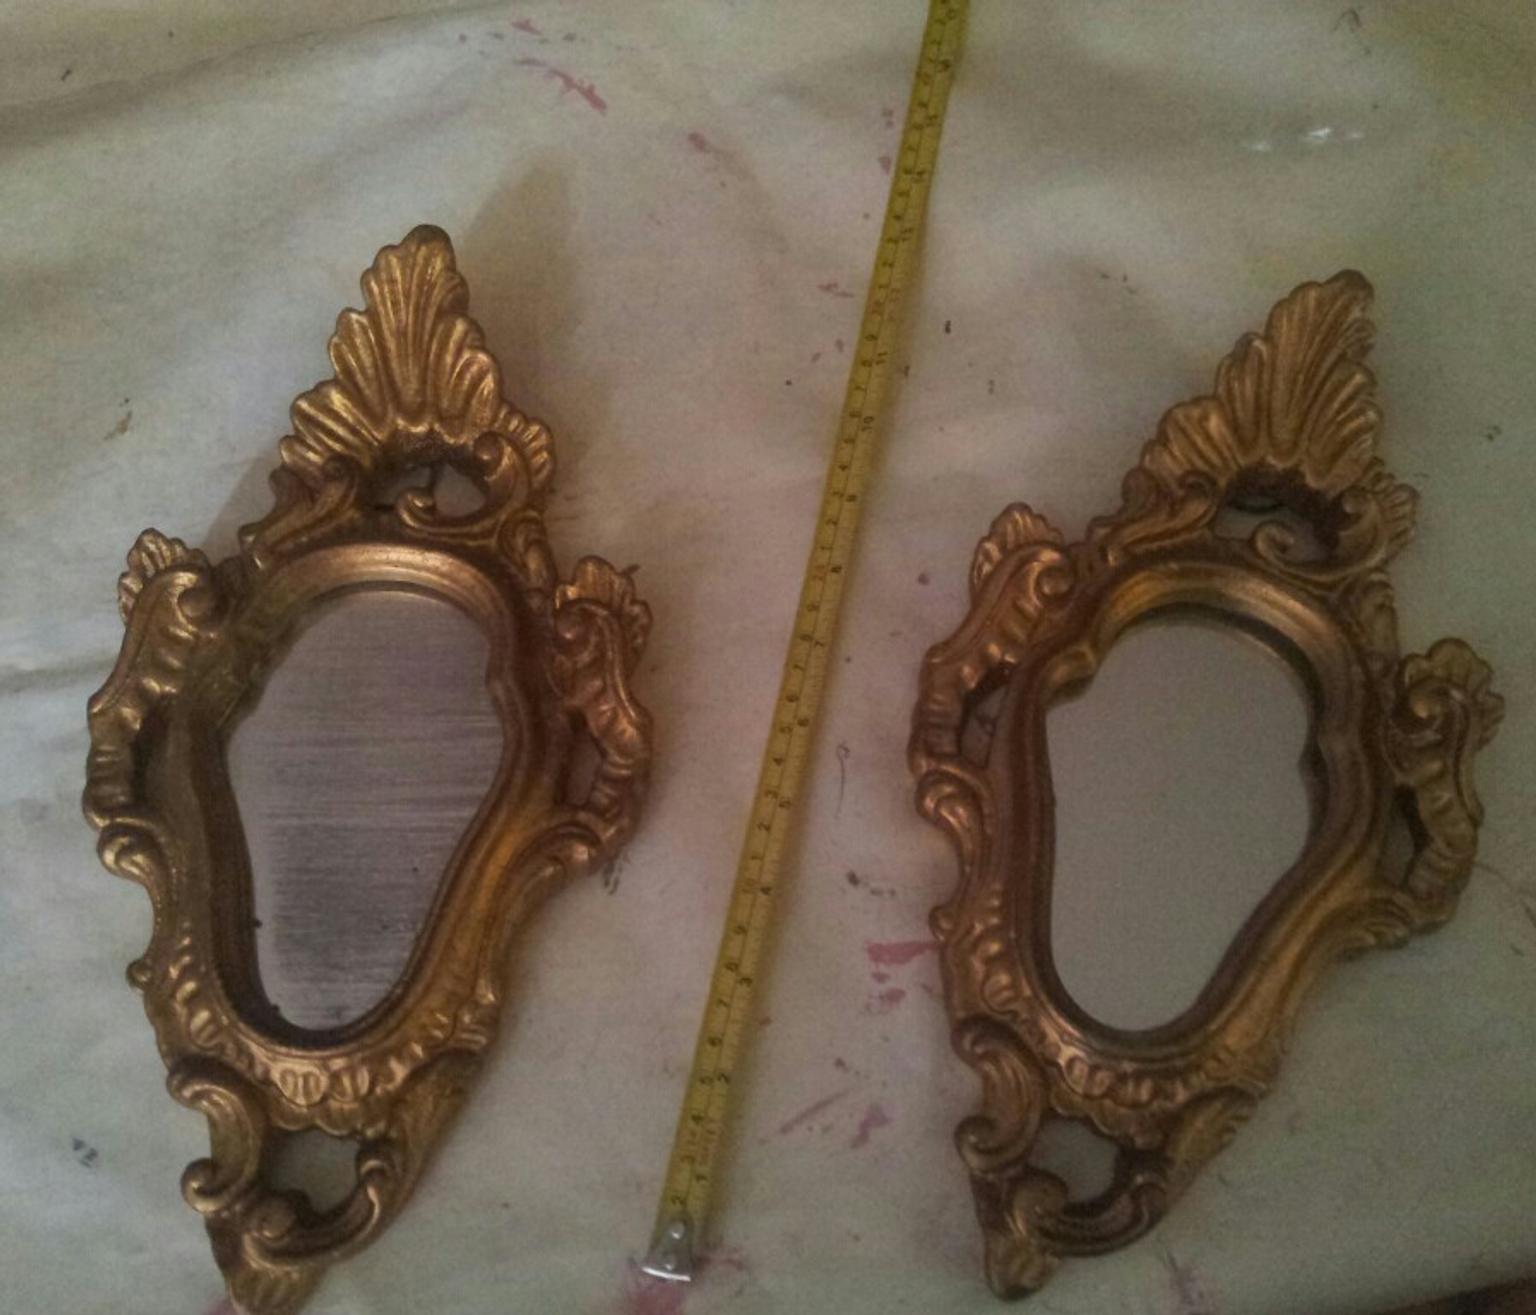 Pair Small Gold Ornate Mirrors In B24 Birmingham For 15 00 For Sale Shpock